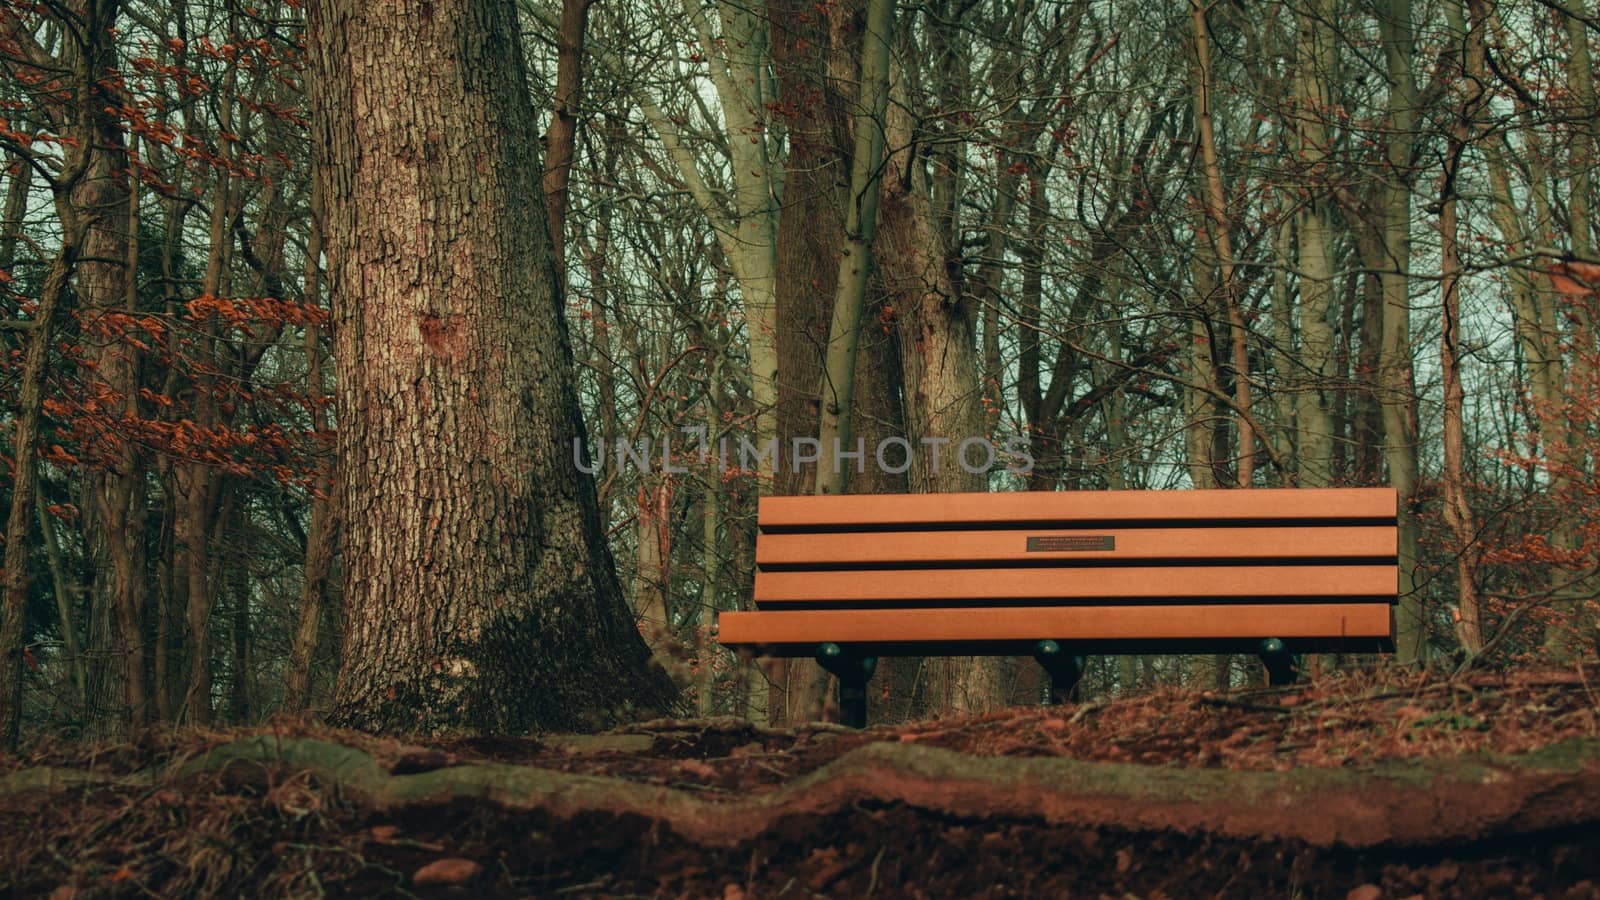 A Wooden Bench Next to a Tree on Top of a Hill in a Dead Winter Forest